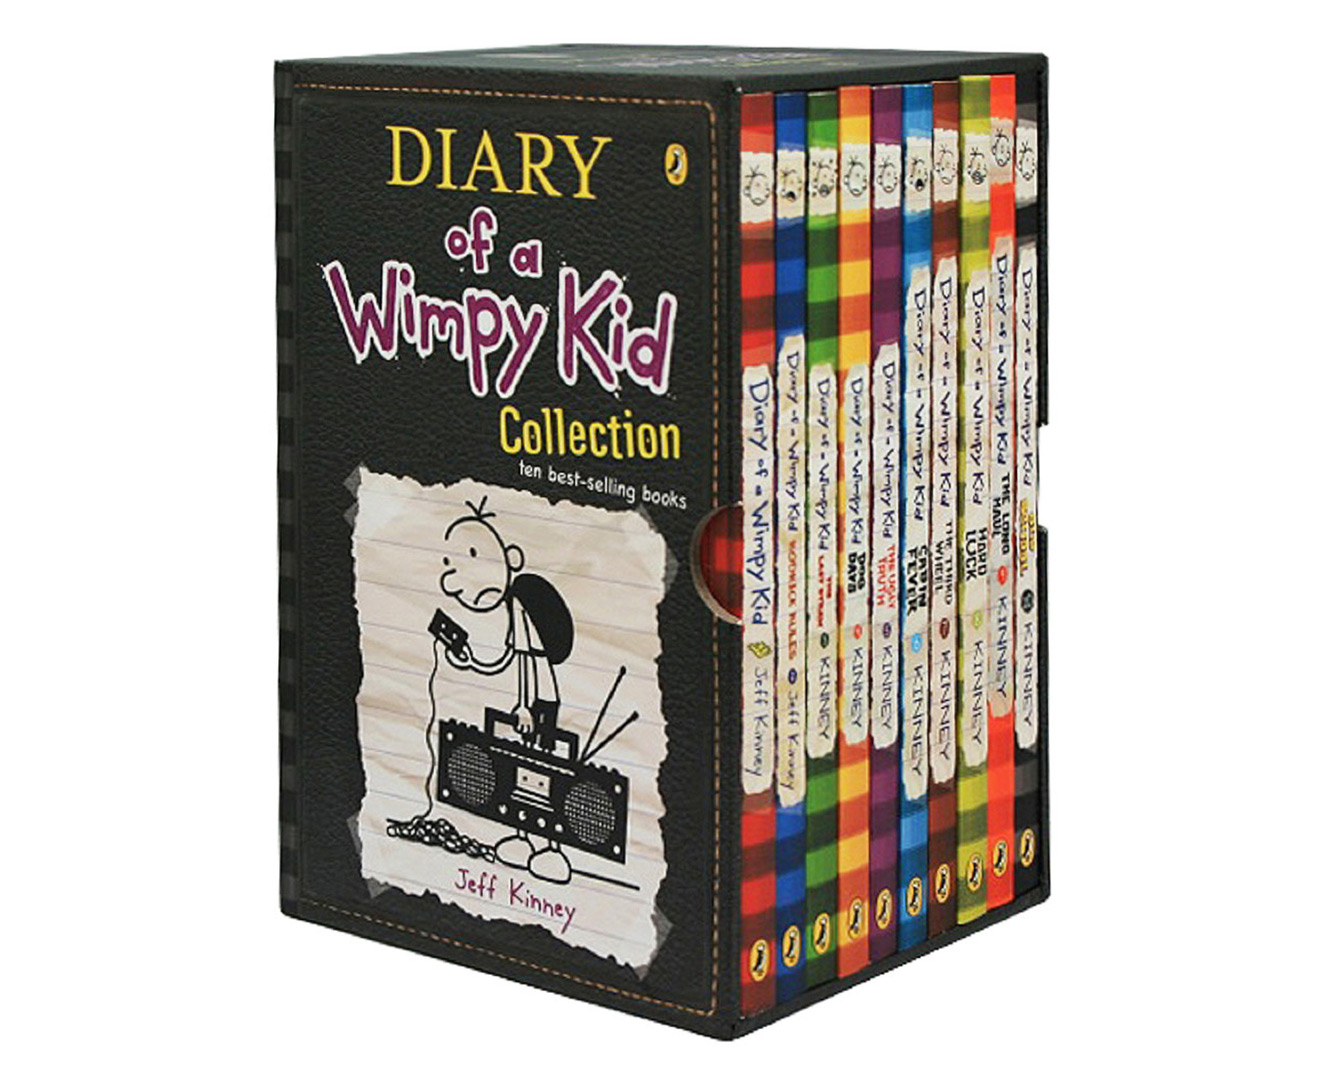 Diary of a Wimpy Kid The Ugly Truth Cabin Fever The Third Wheel Hard
Luck No 58 Epub-Ebook